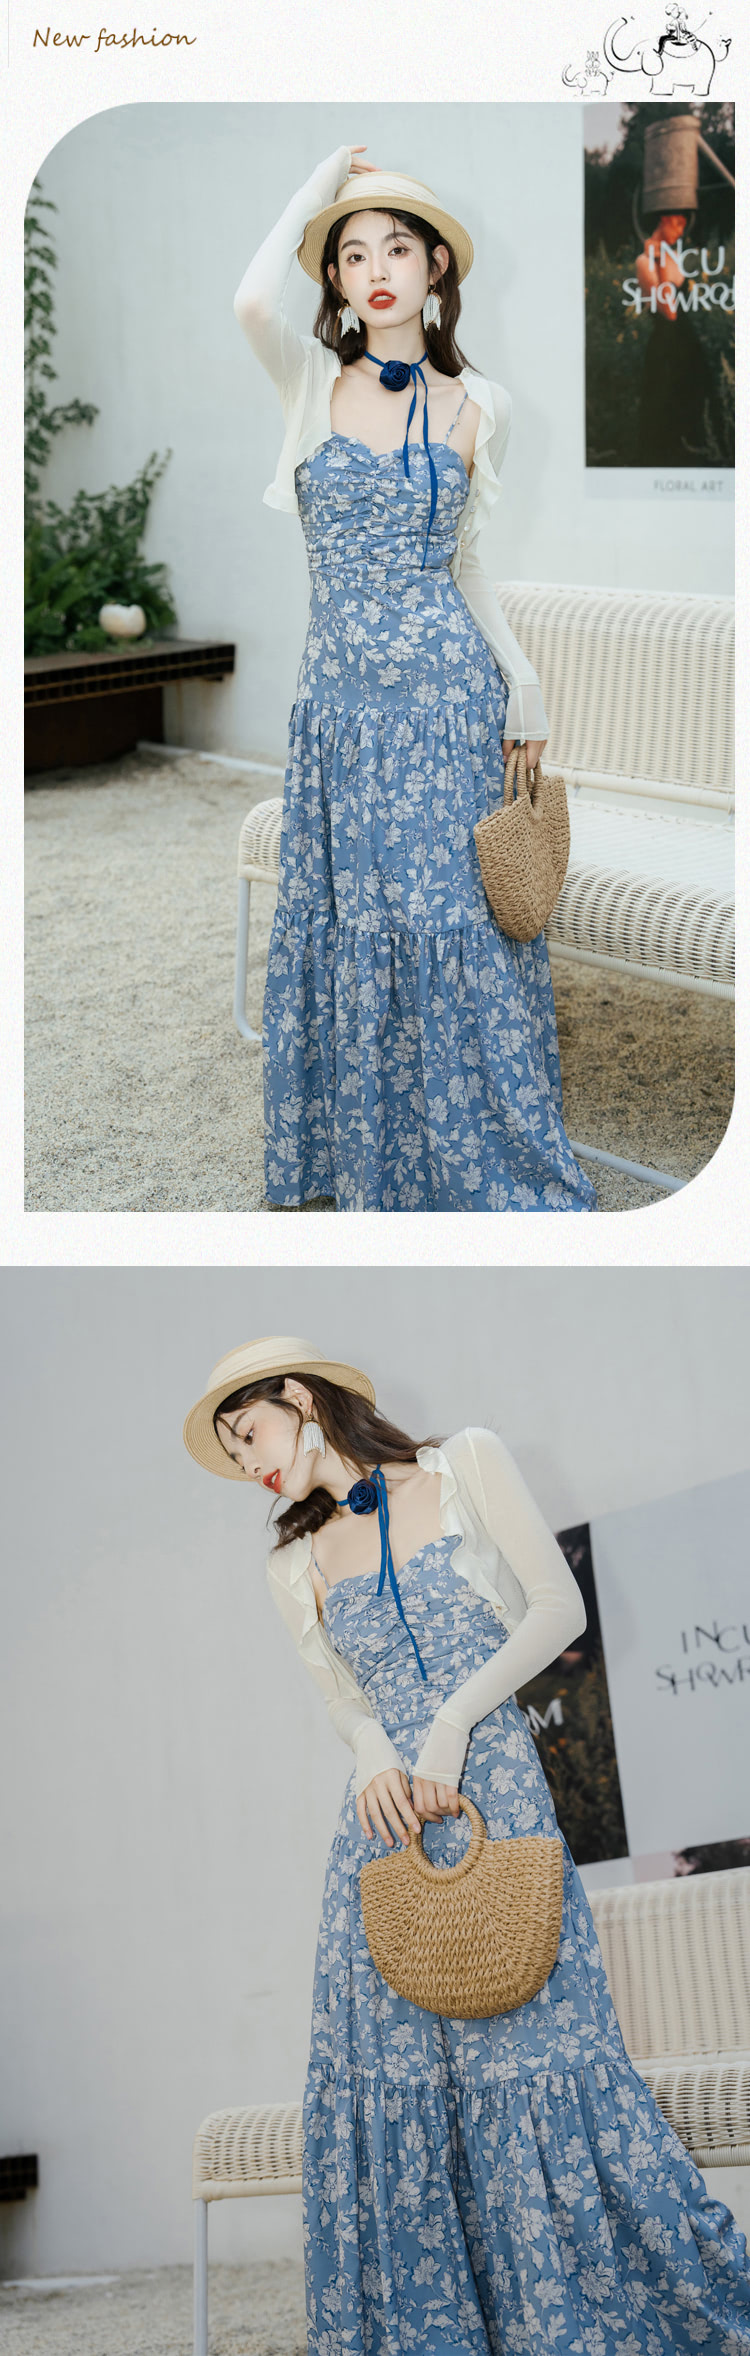 Sweet-Blue-Floral-Print-Slip-Dress-Cardigan-2-Piece-Casual-Outfits11